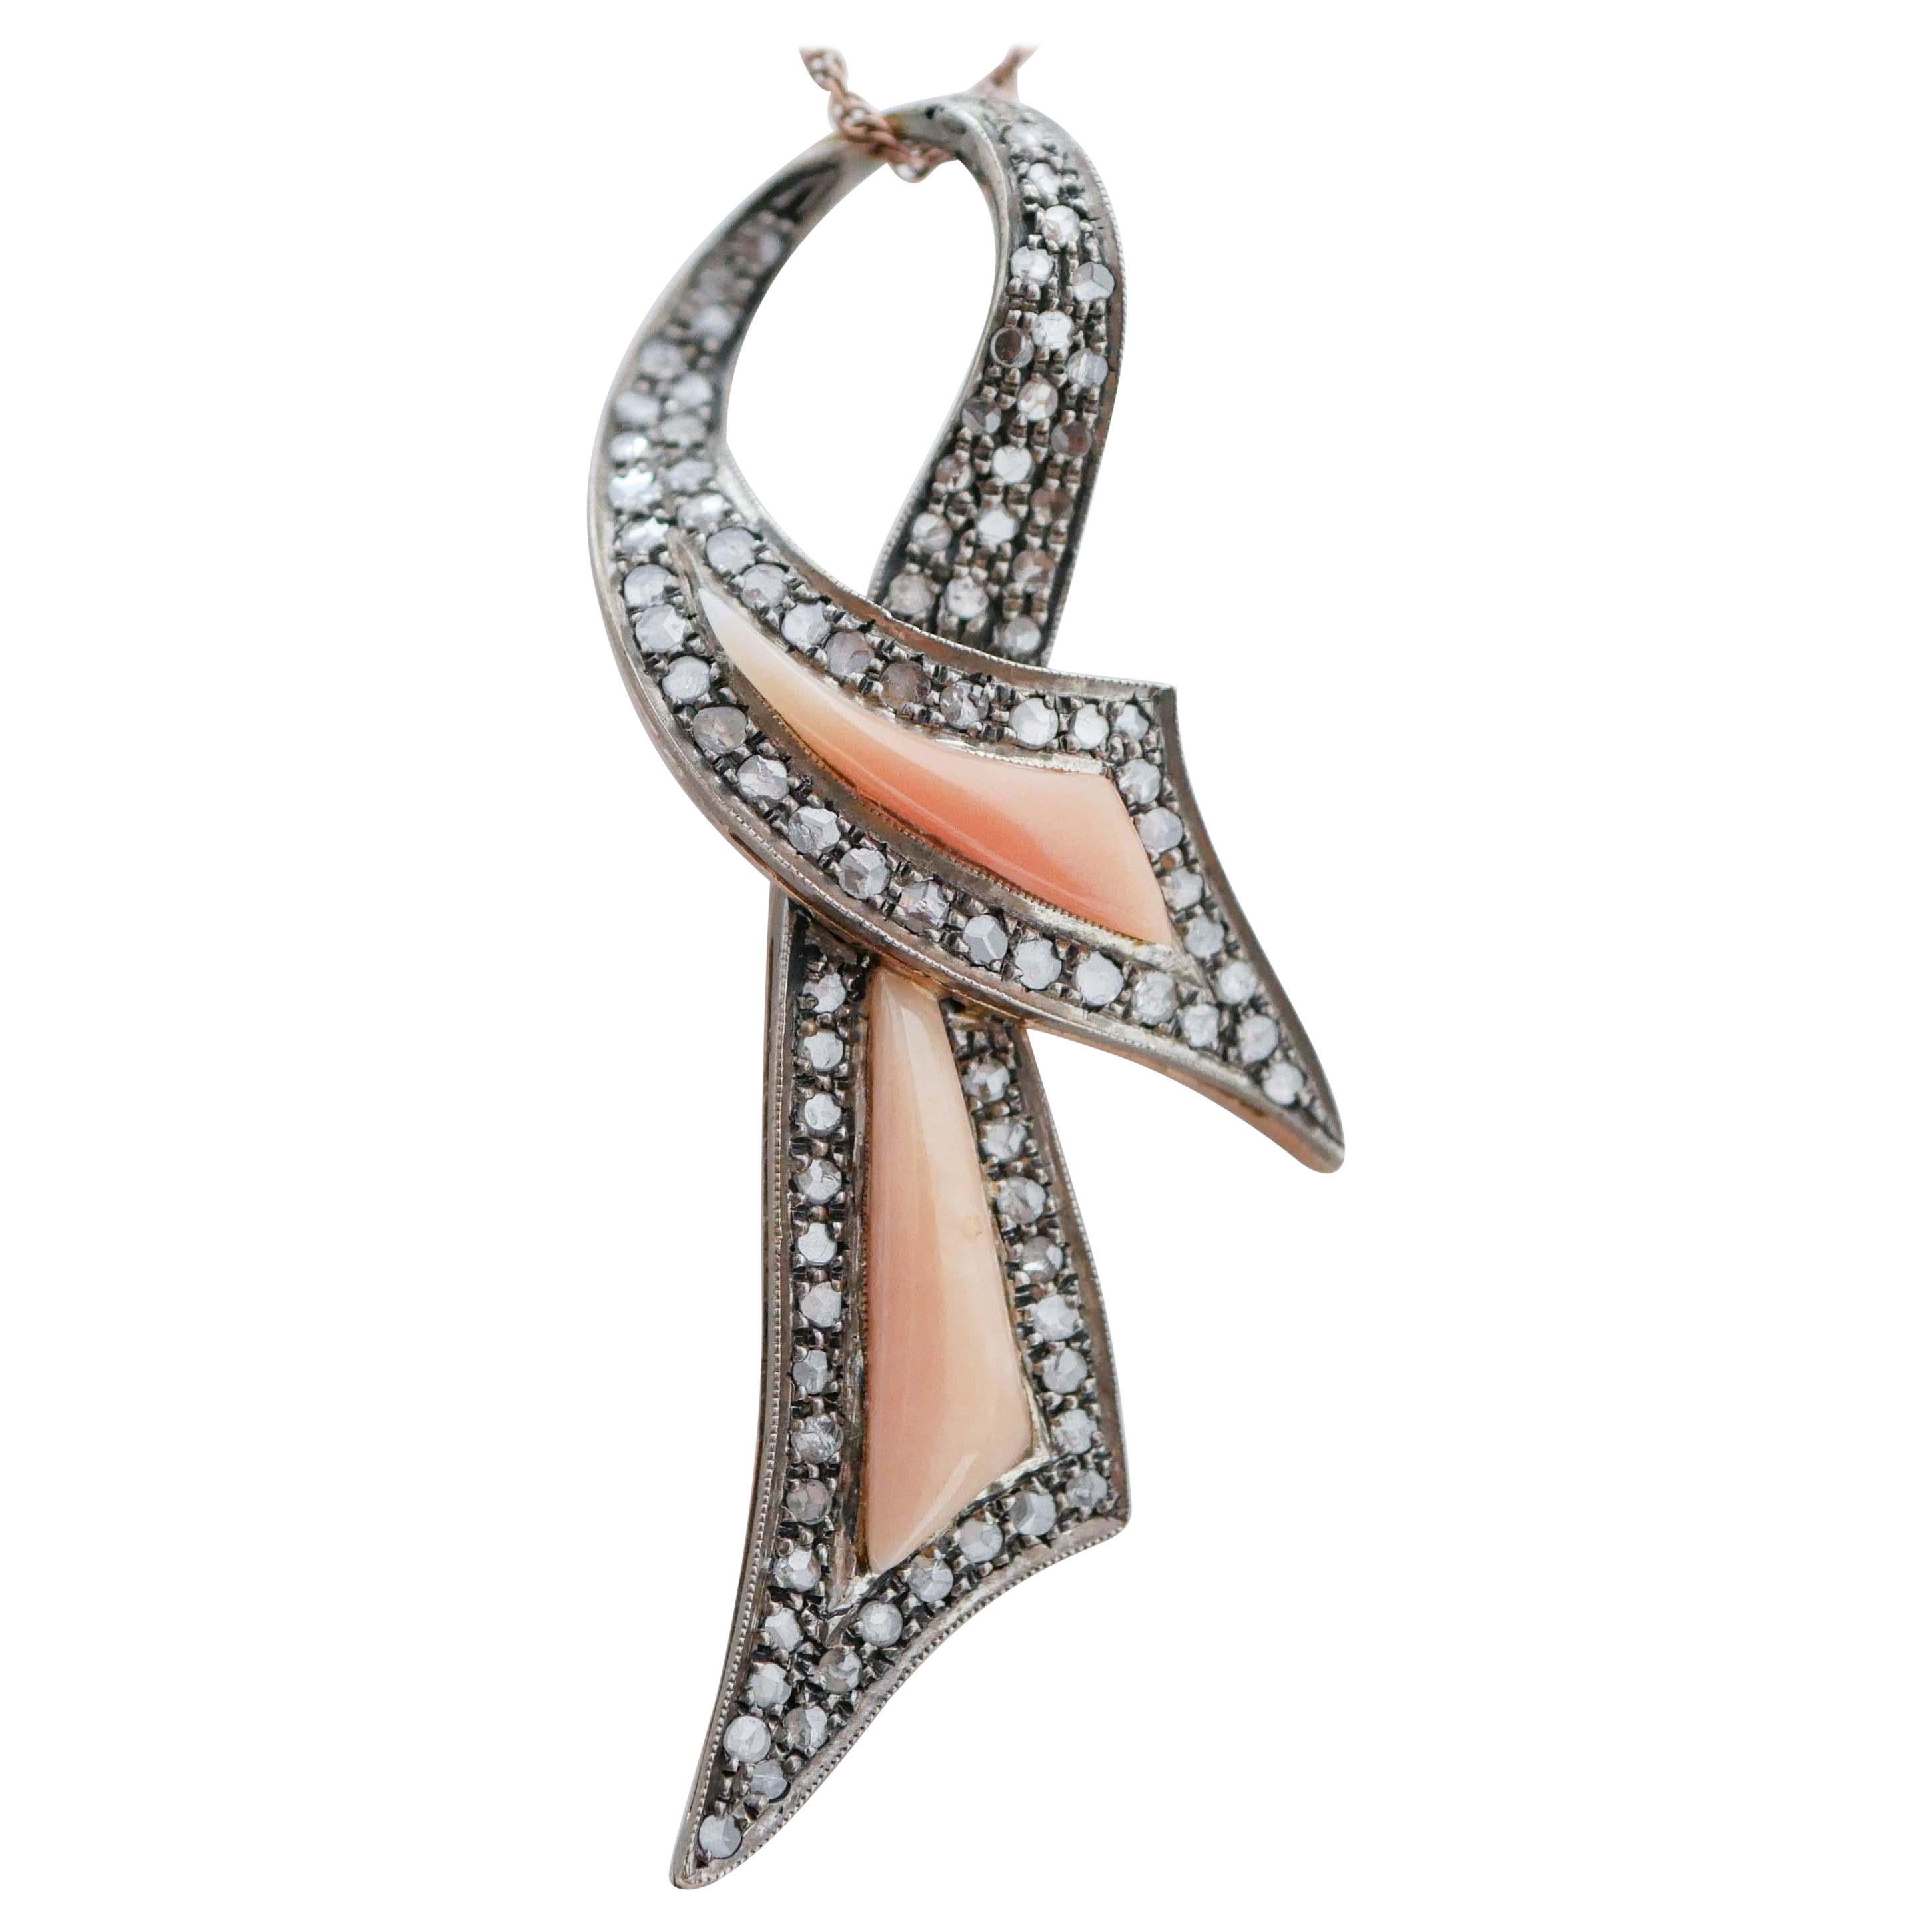 Coral, Diamonds, 14 Karat Rose Gold and Silver Pendant Necklace.